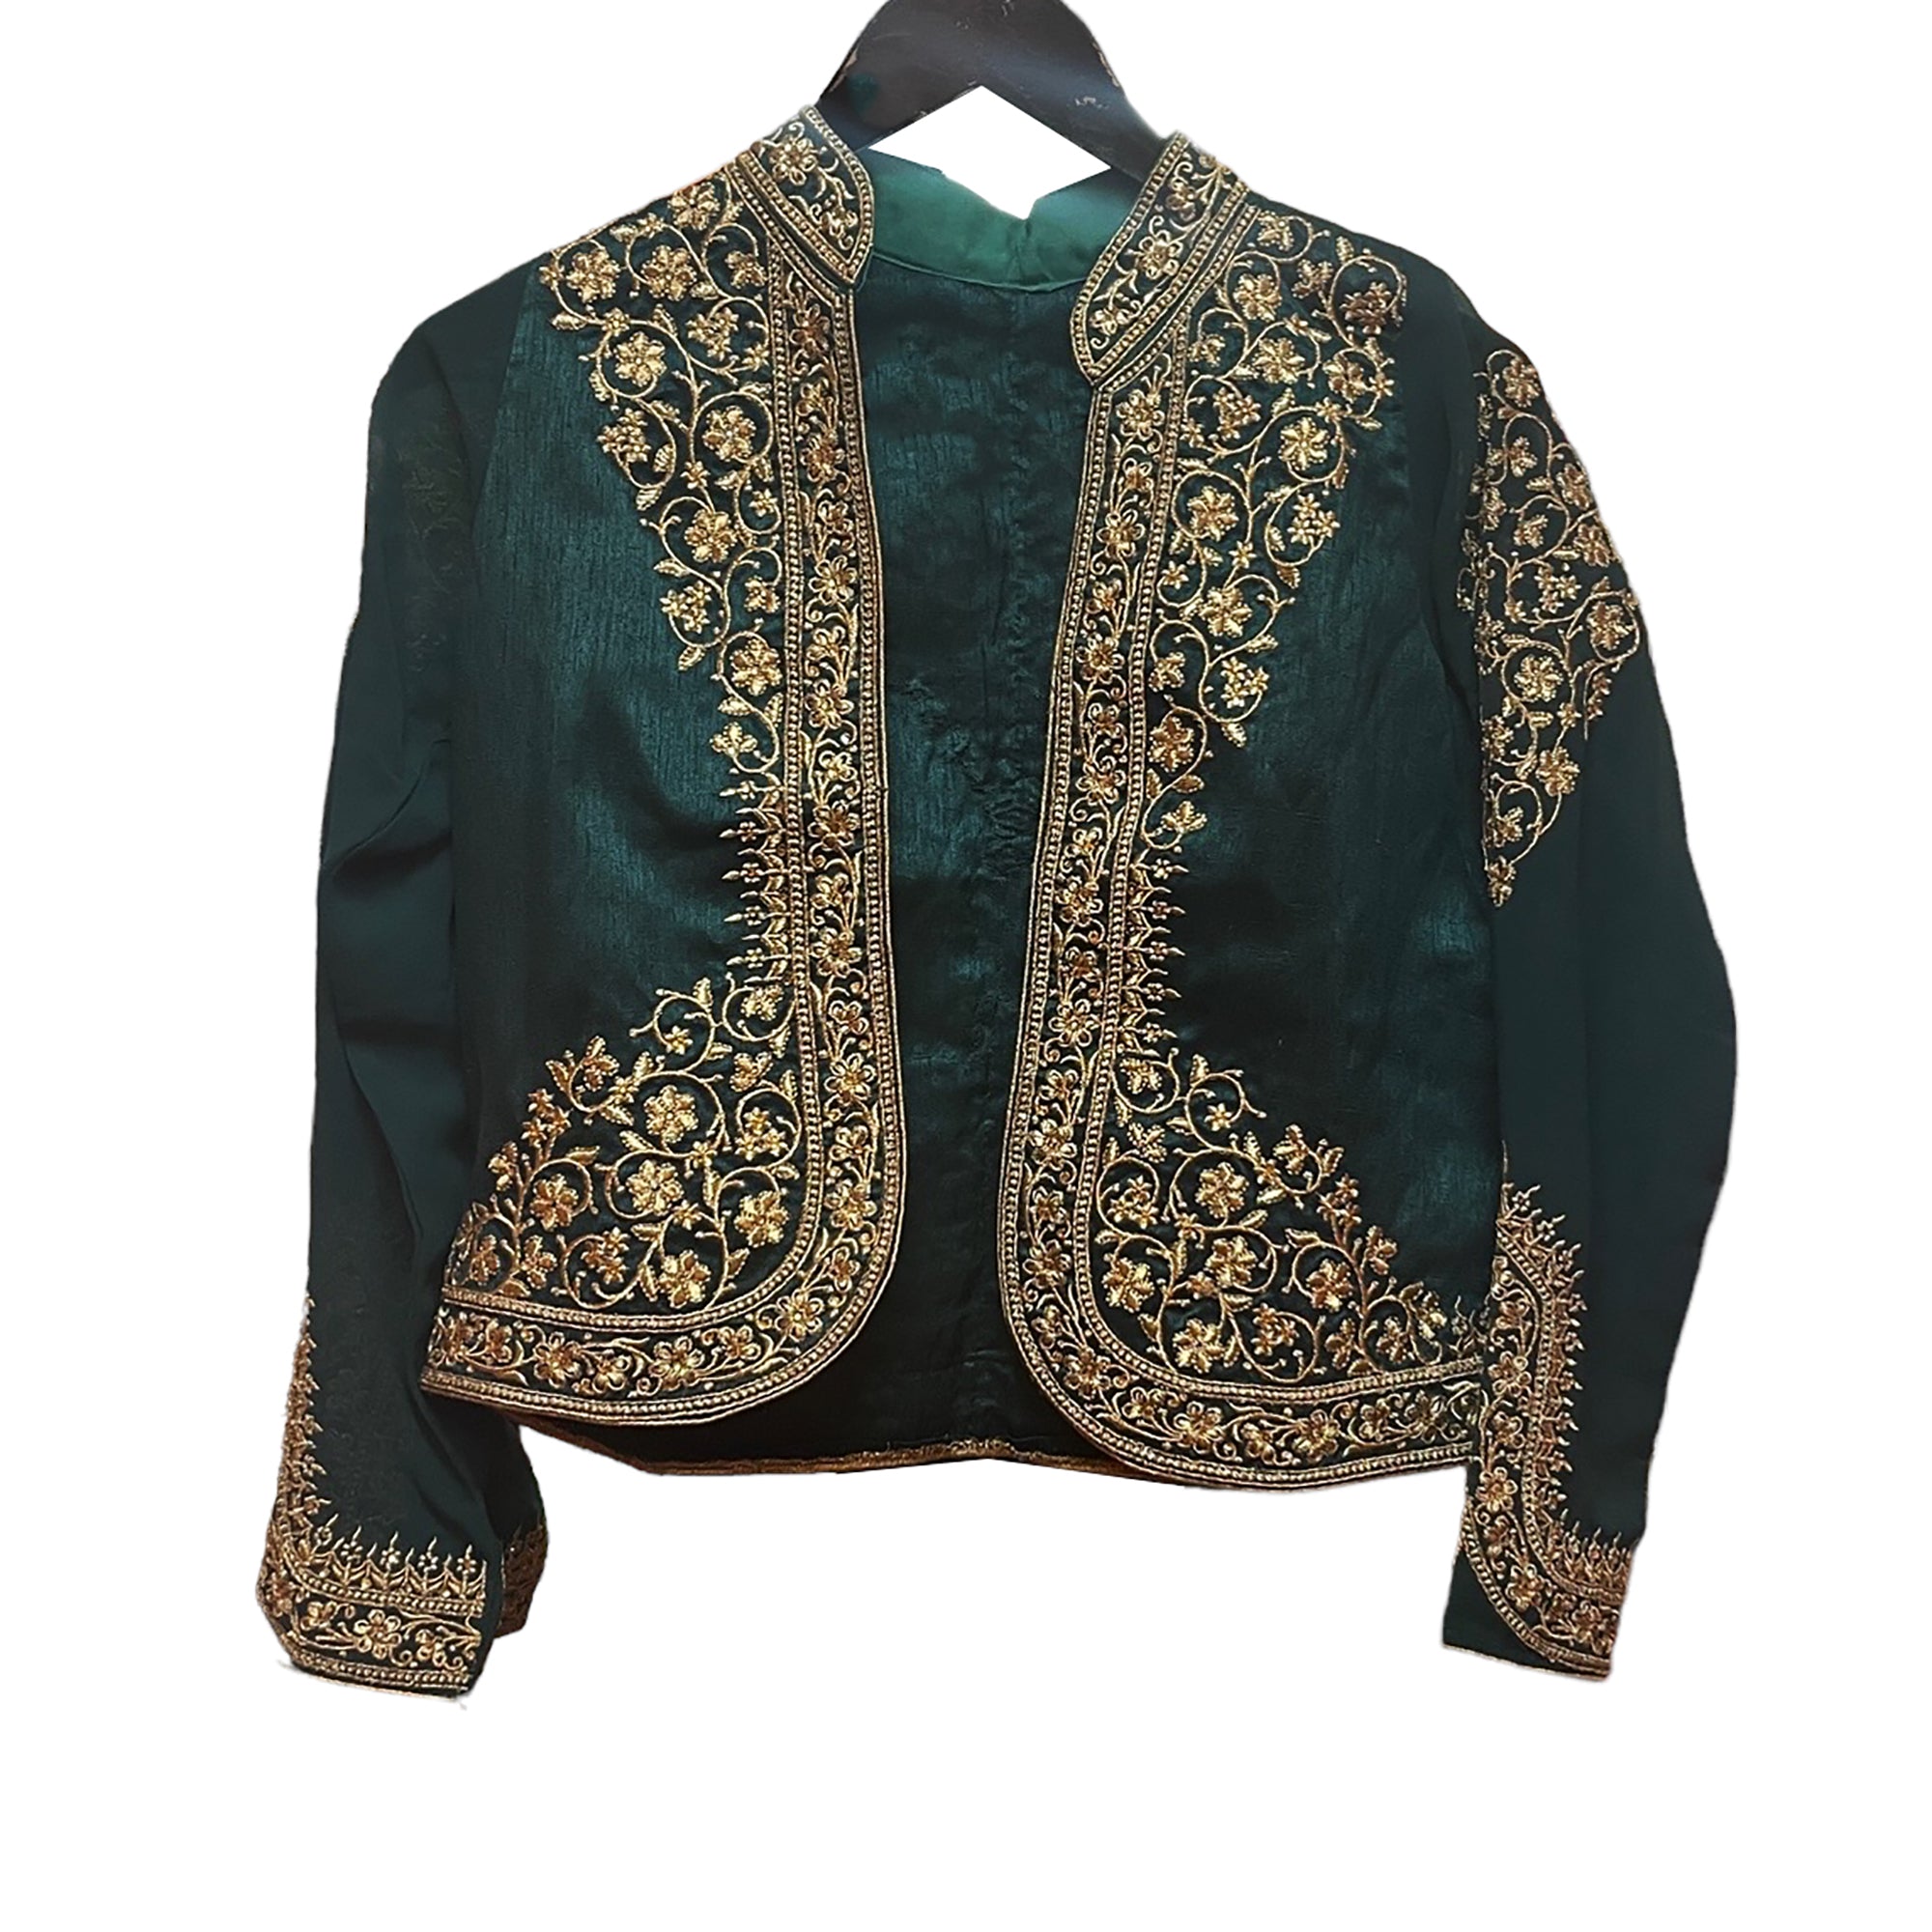 Dark Green Silk Jacket with Hand Embroidery - Vintage India NYC